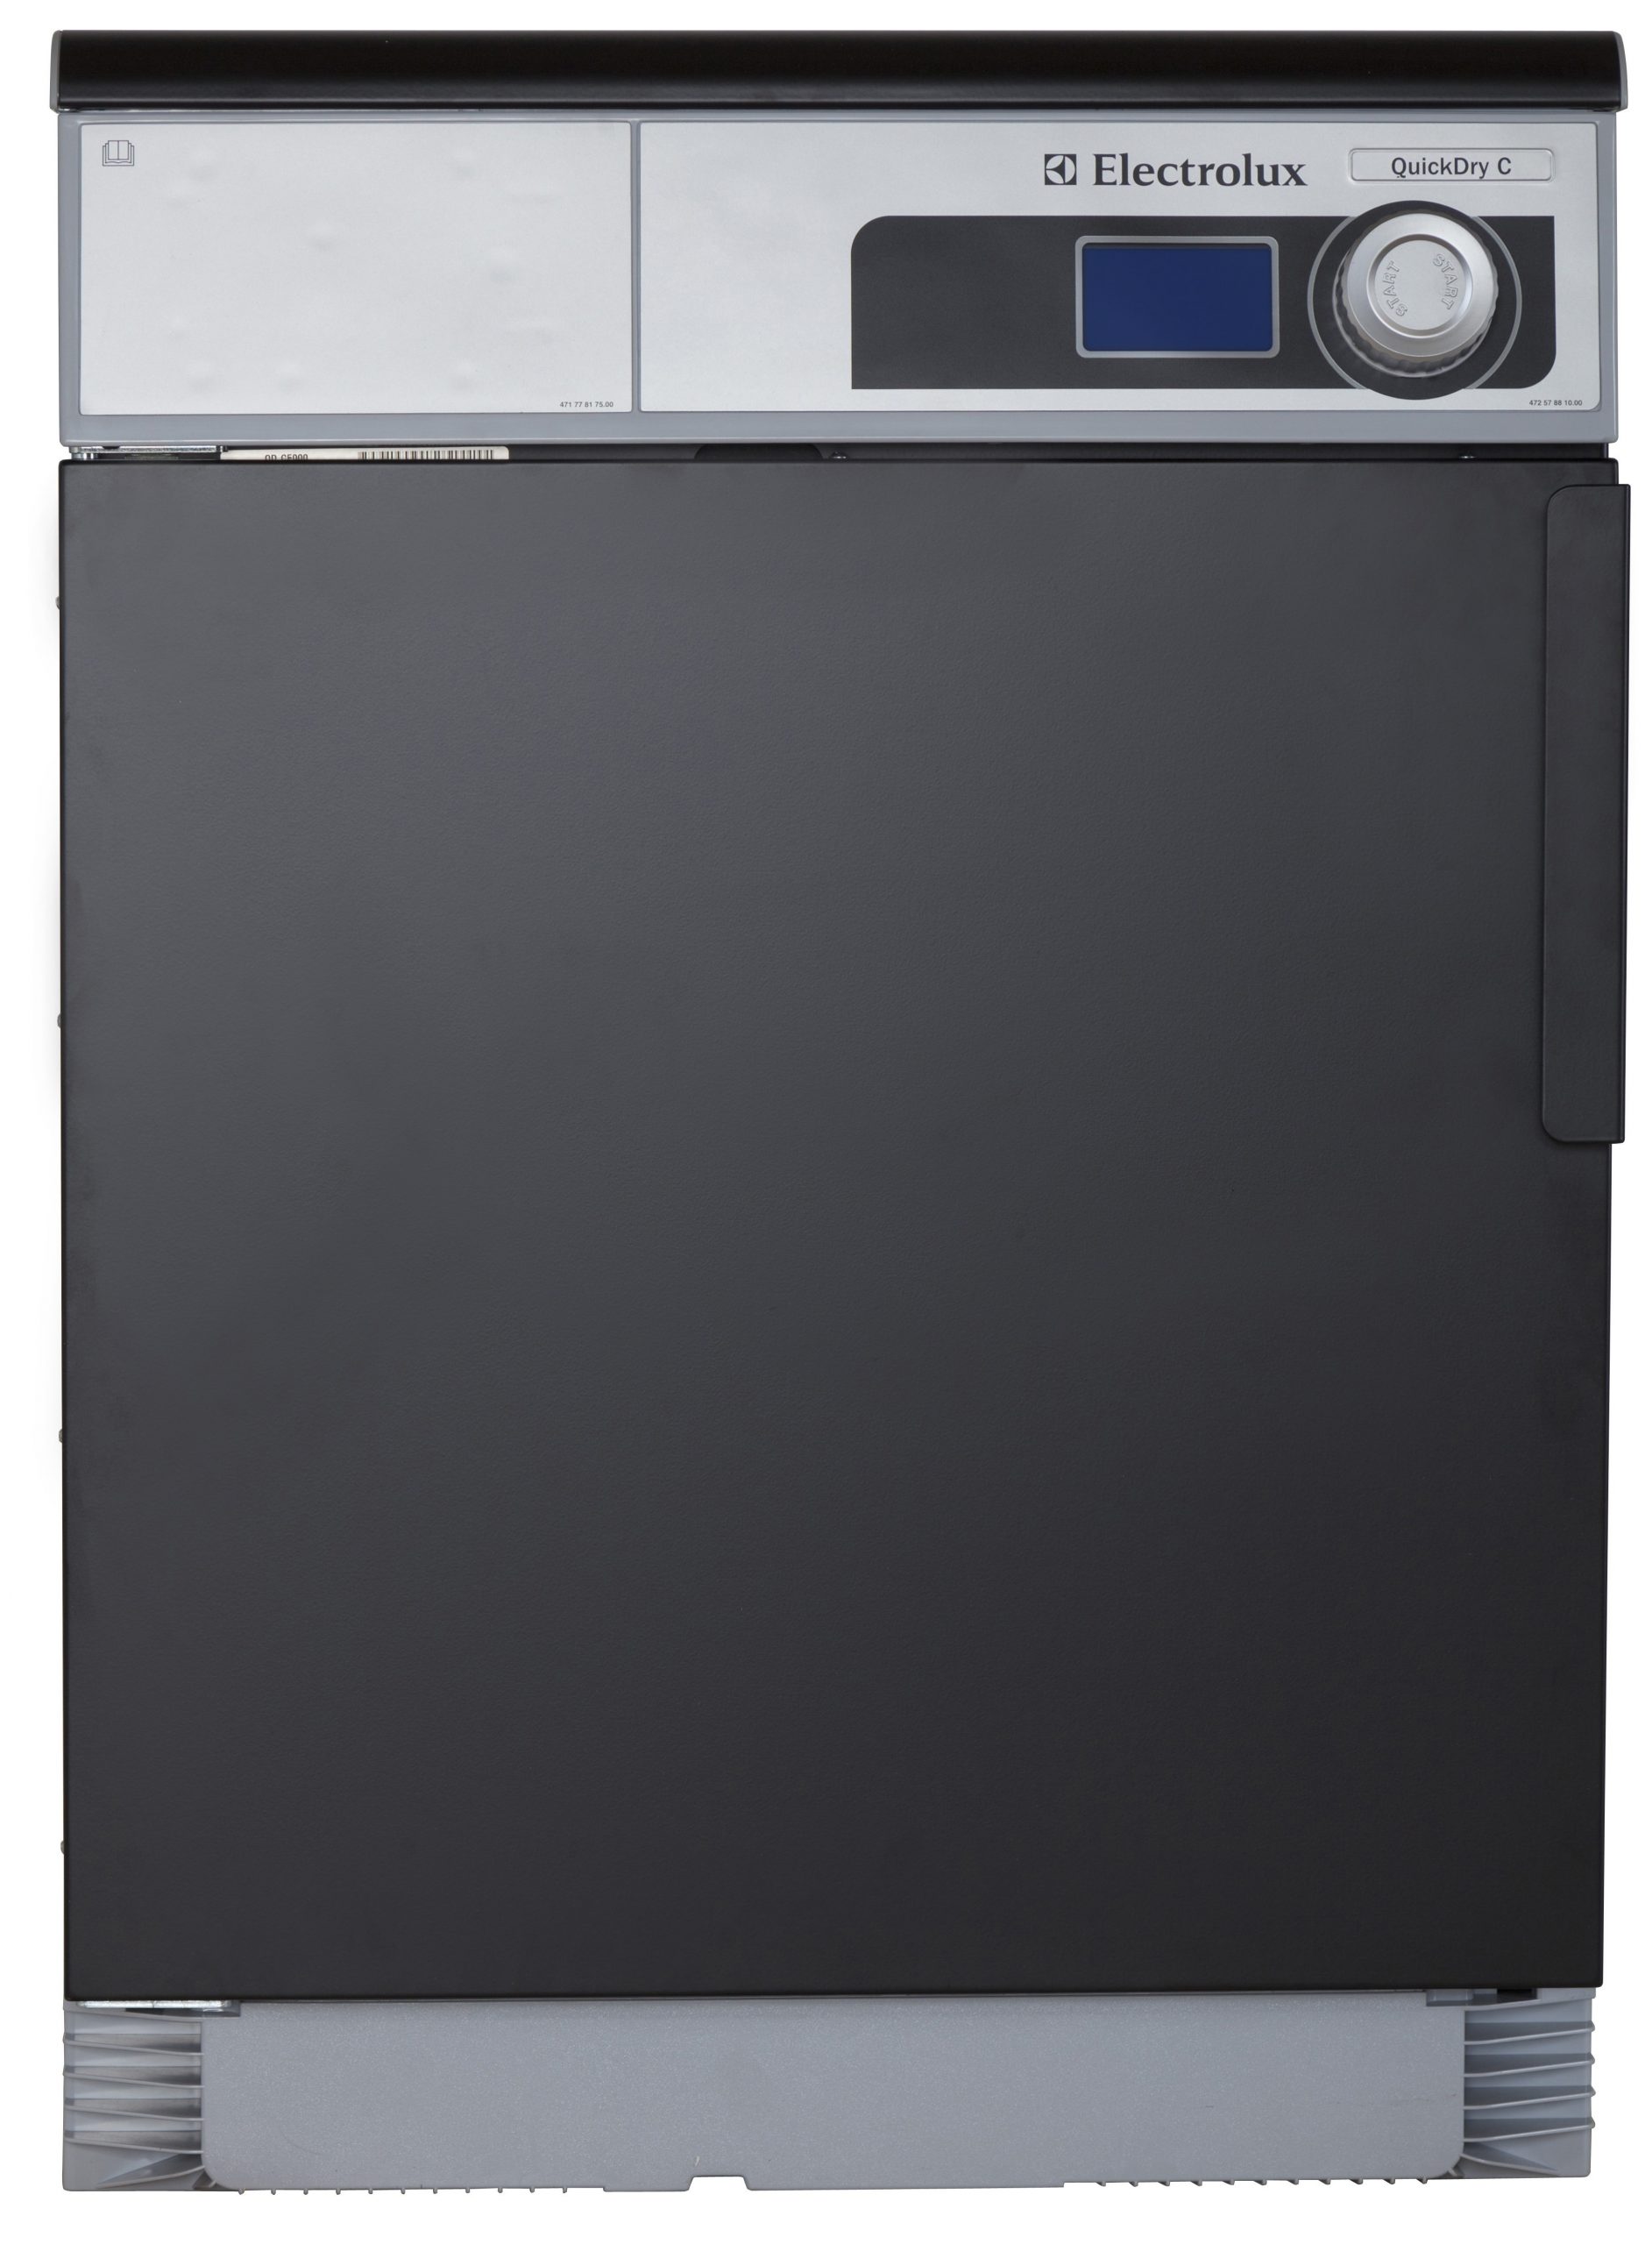 Electrolux - QuickDry - Multibrand Professional